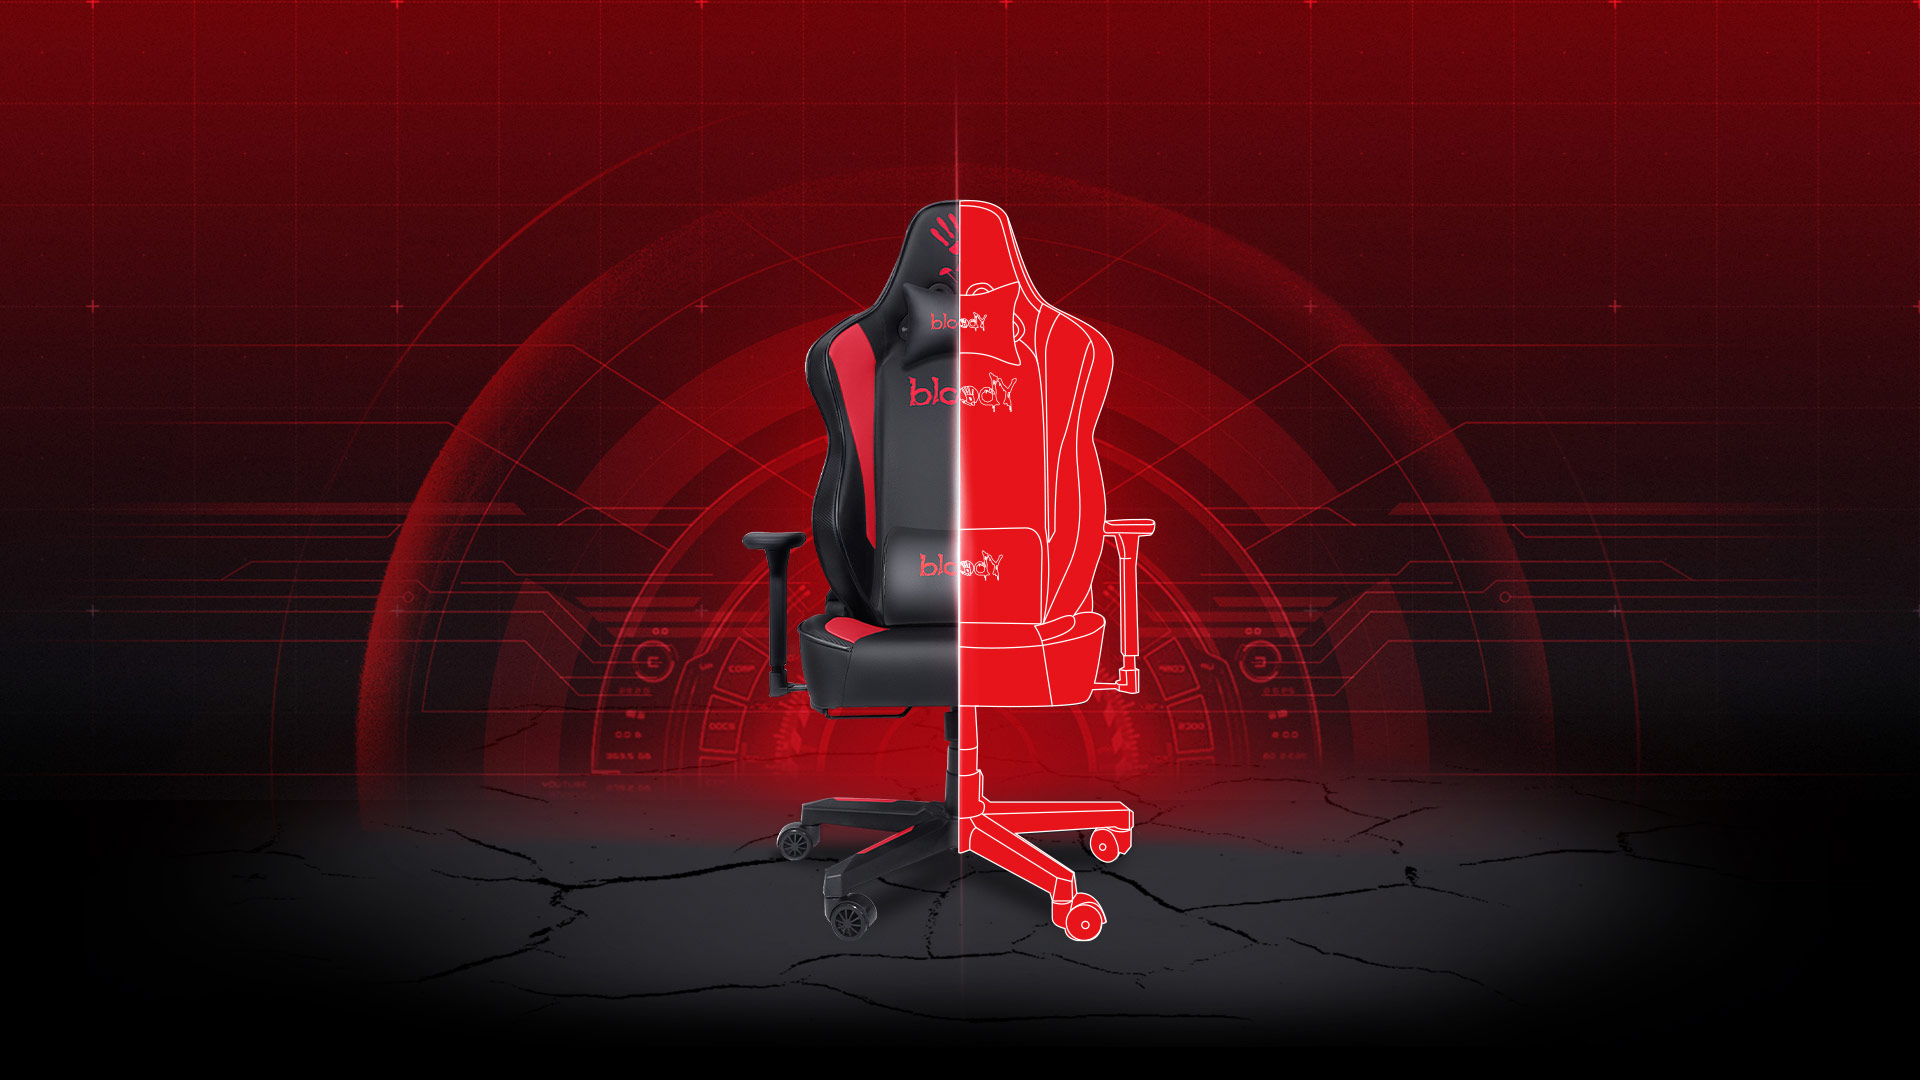 Comfortable & Durable Bloody Gaming Chair with Ergonomic Backrest